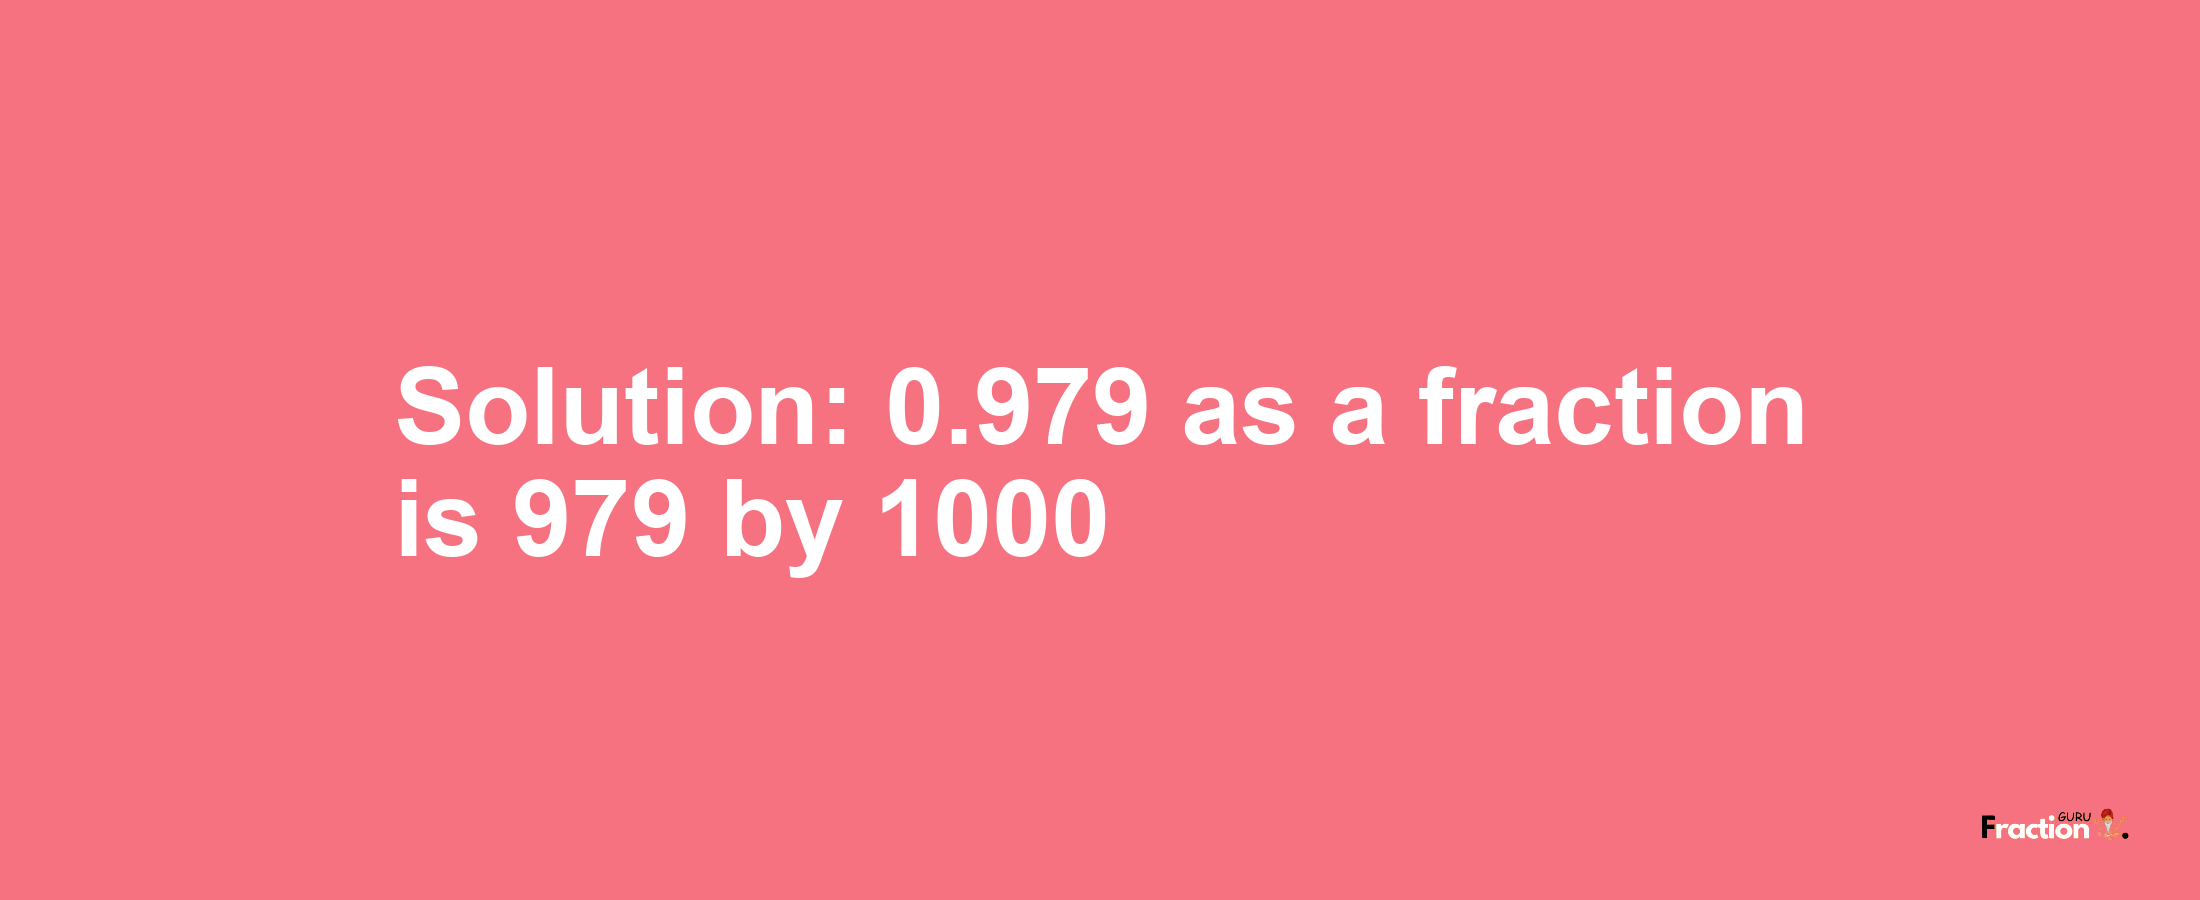 Solution:0.979 as a fraction is 979/1000